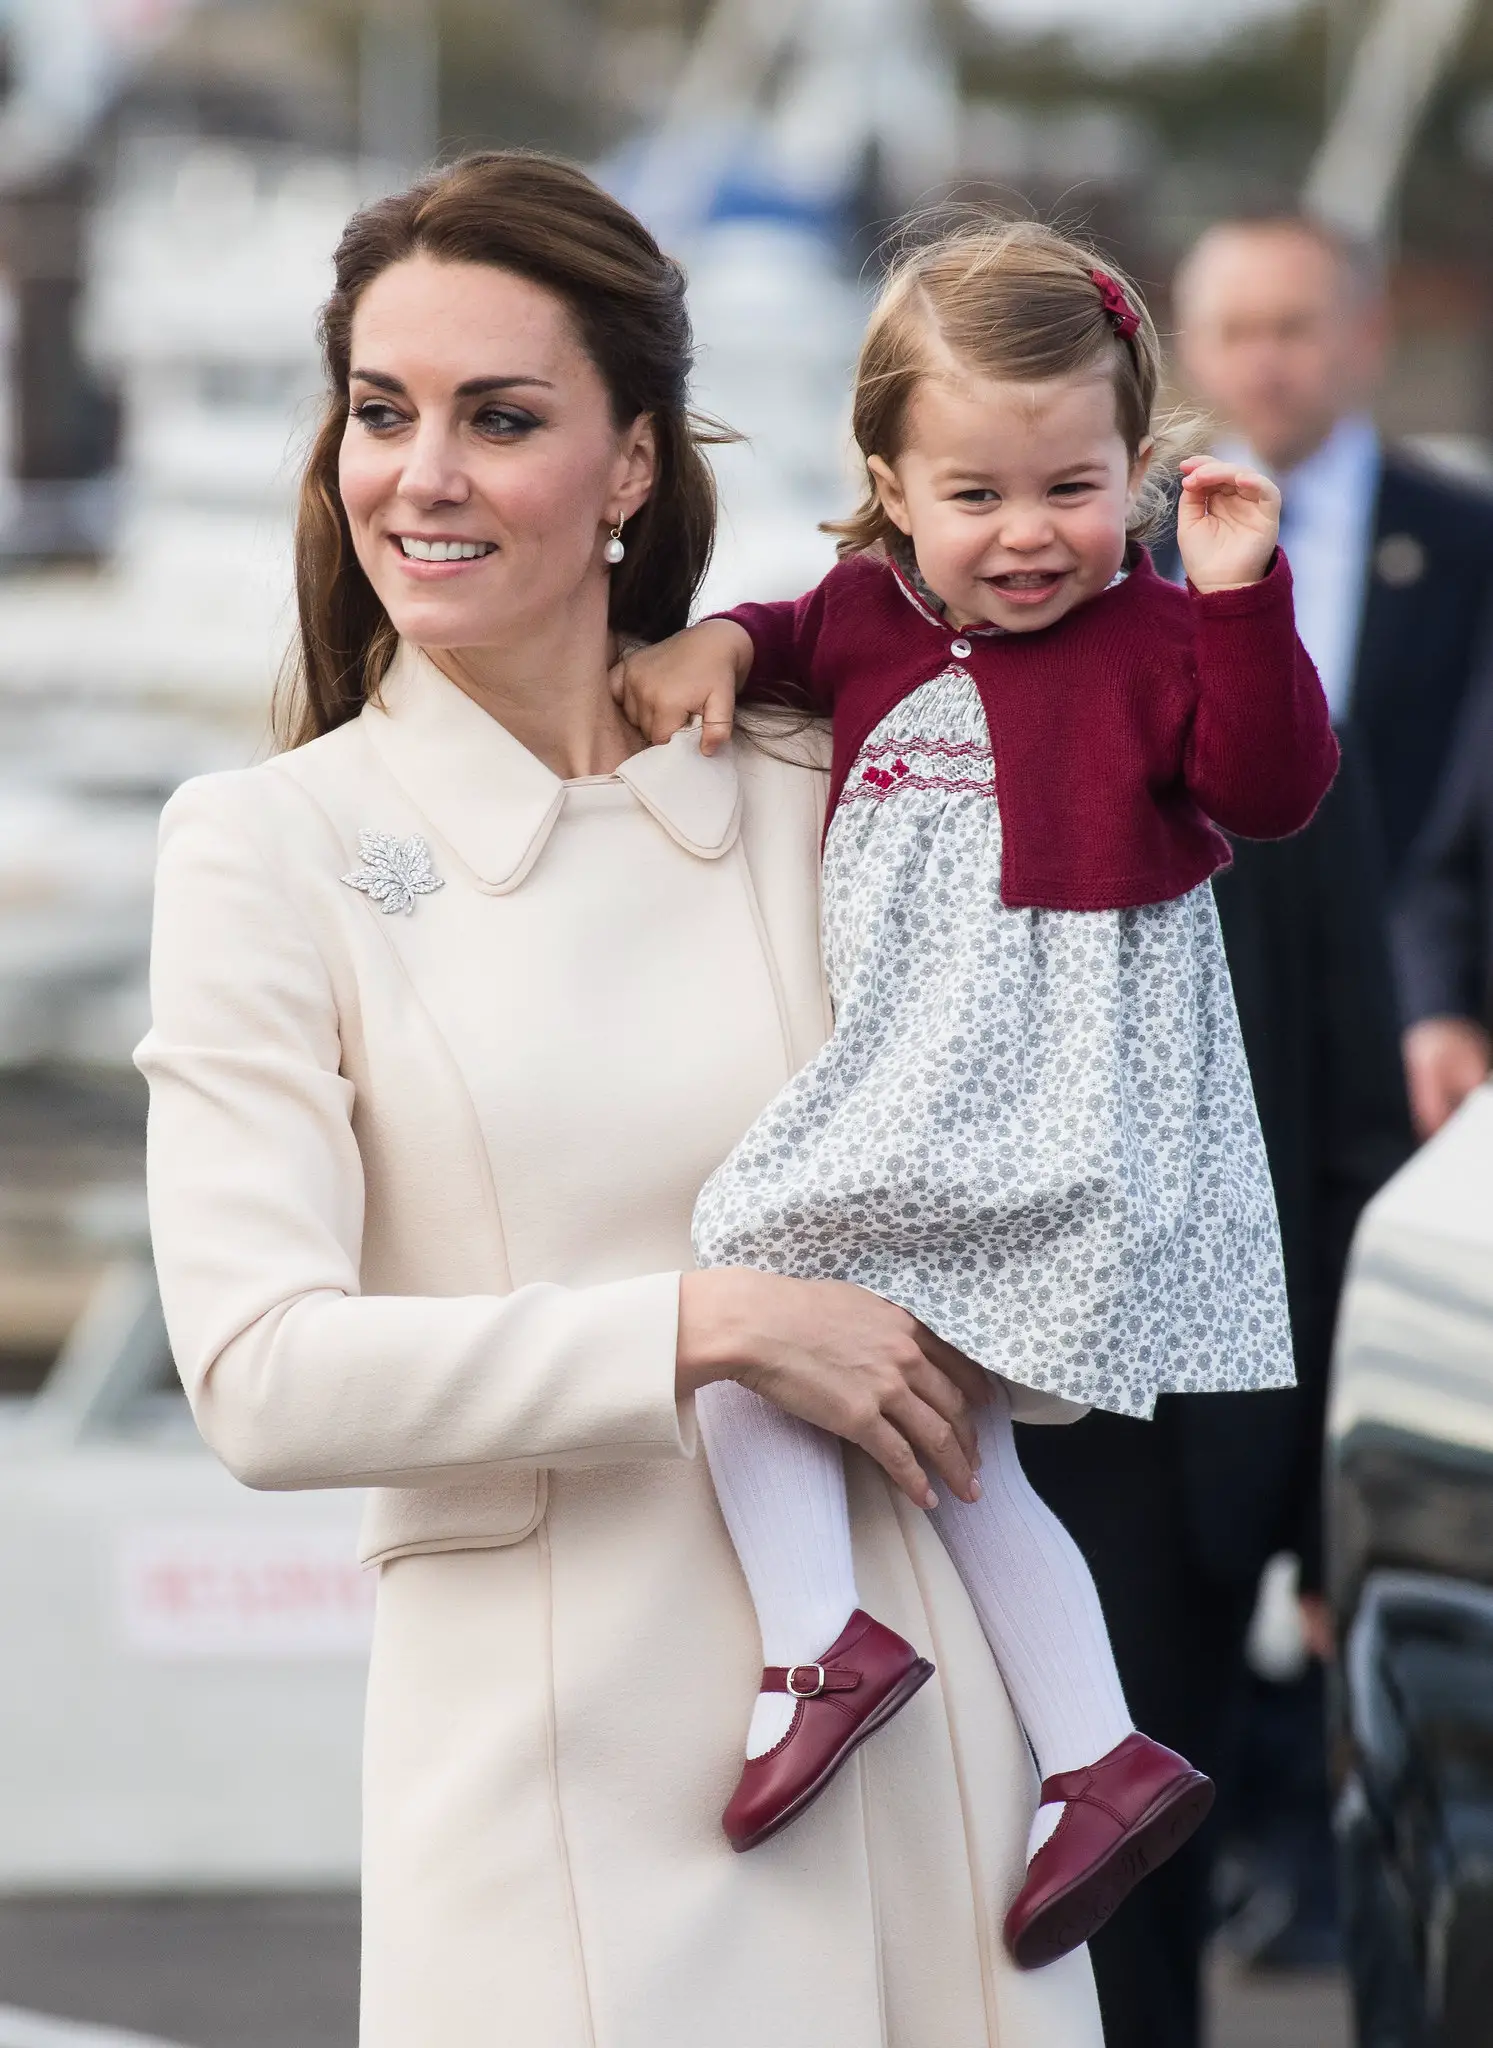 The duchess of Cambridge said good bye to Canada in 2016